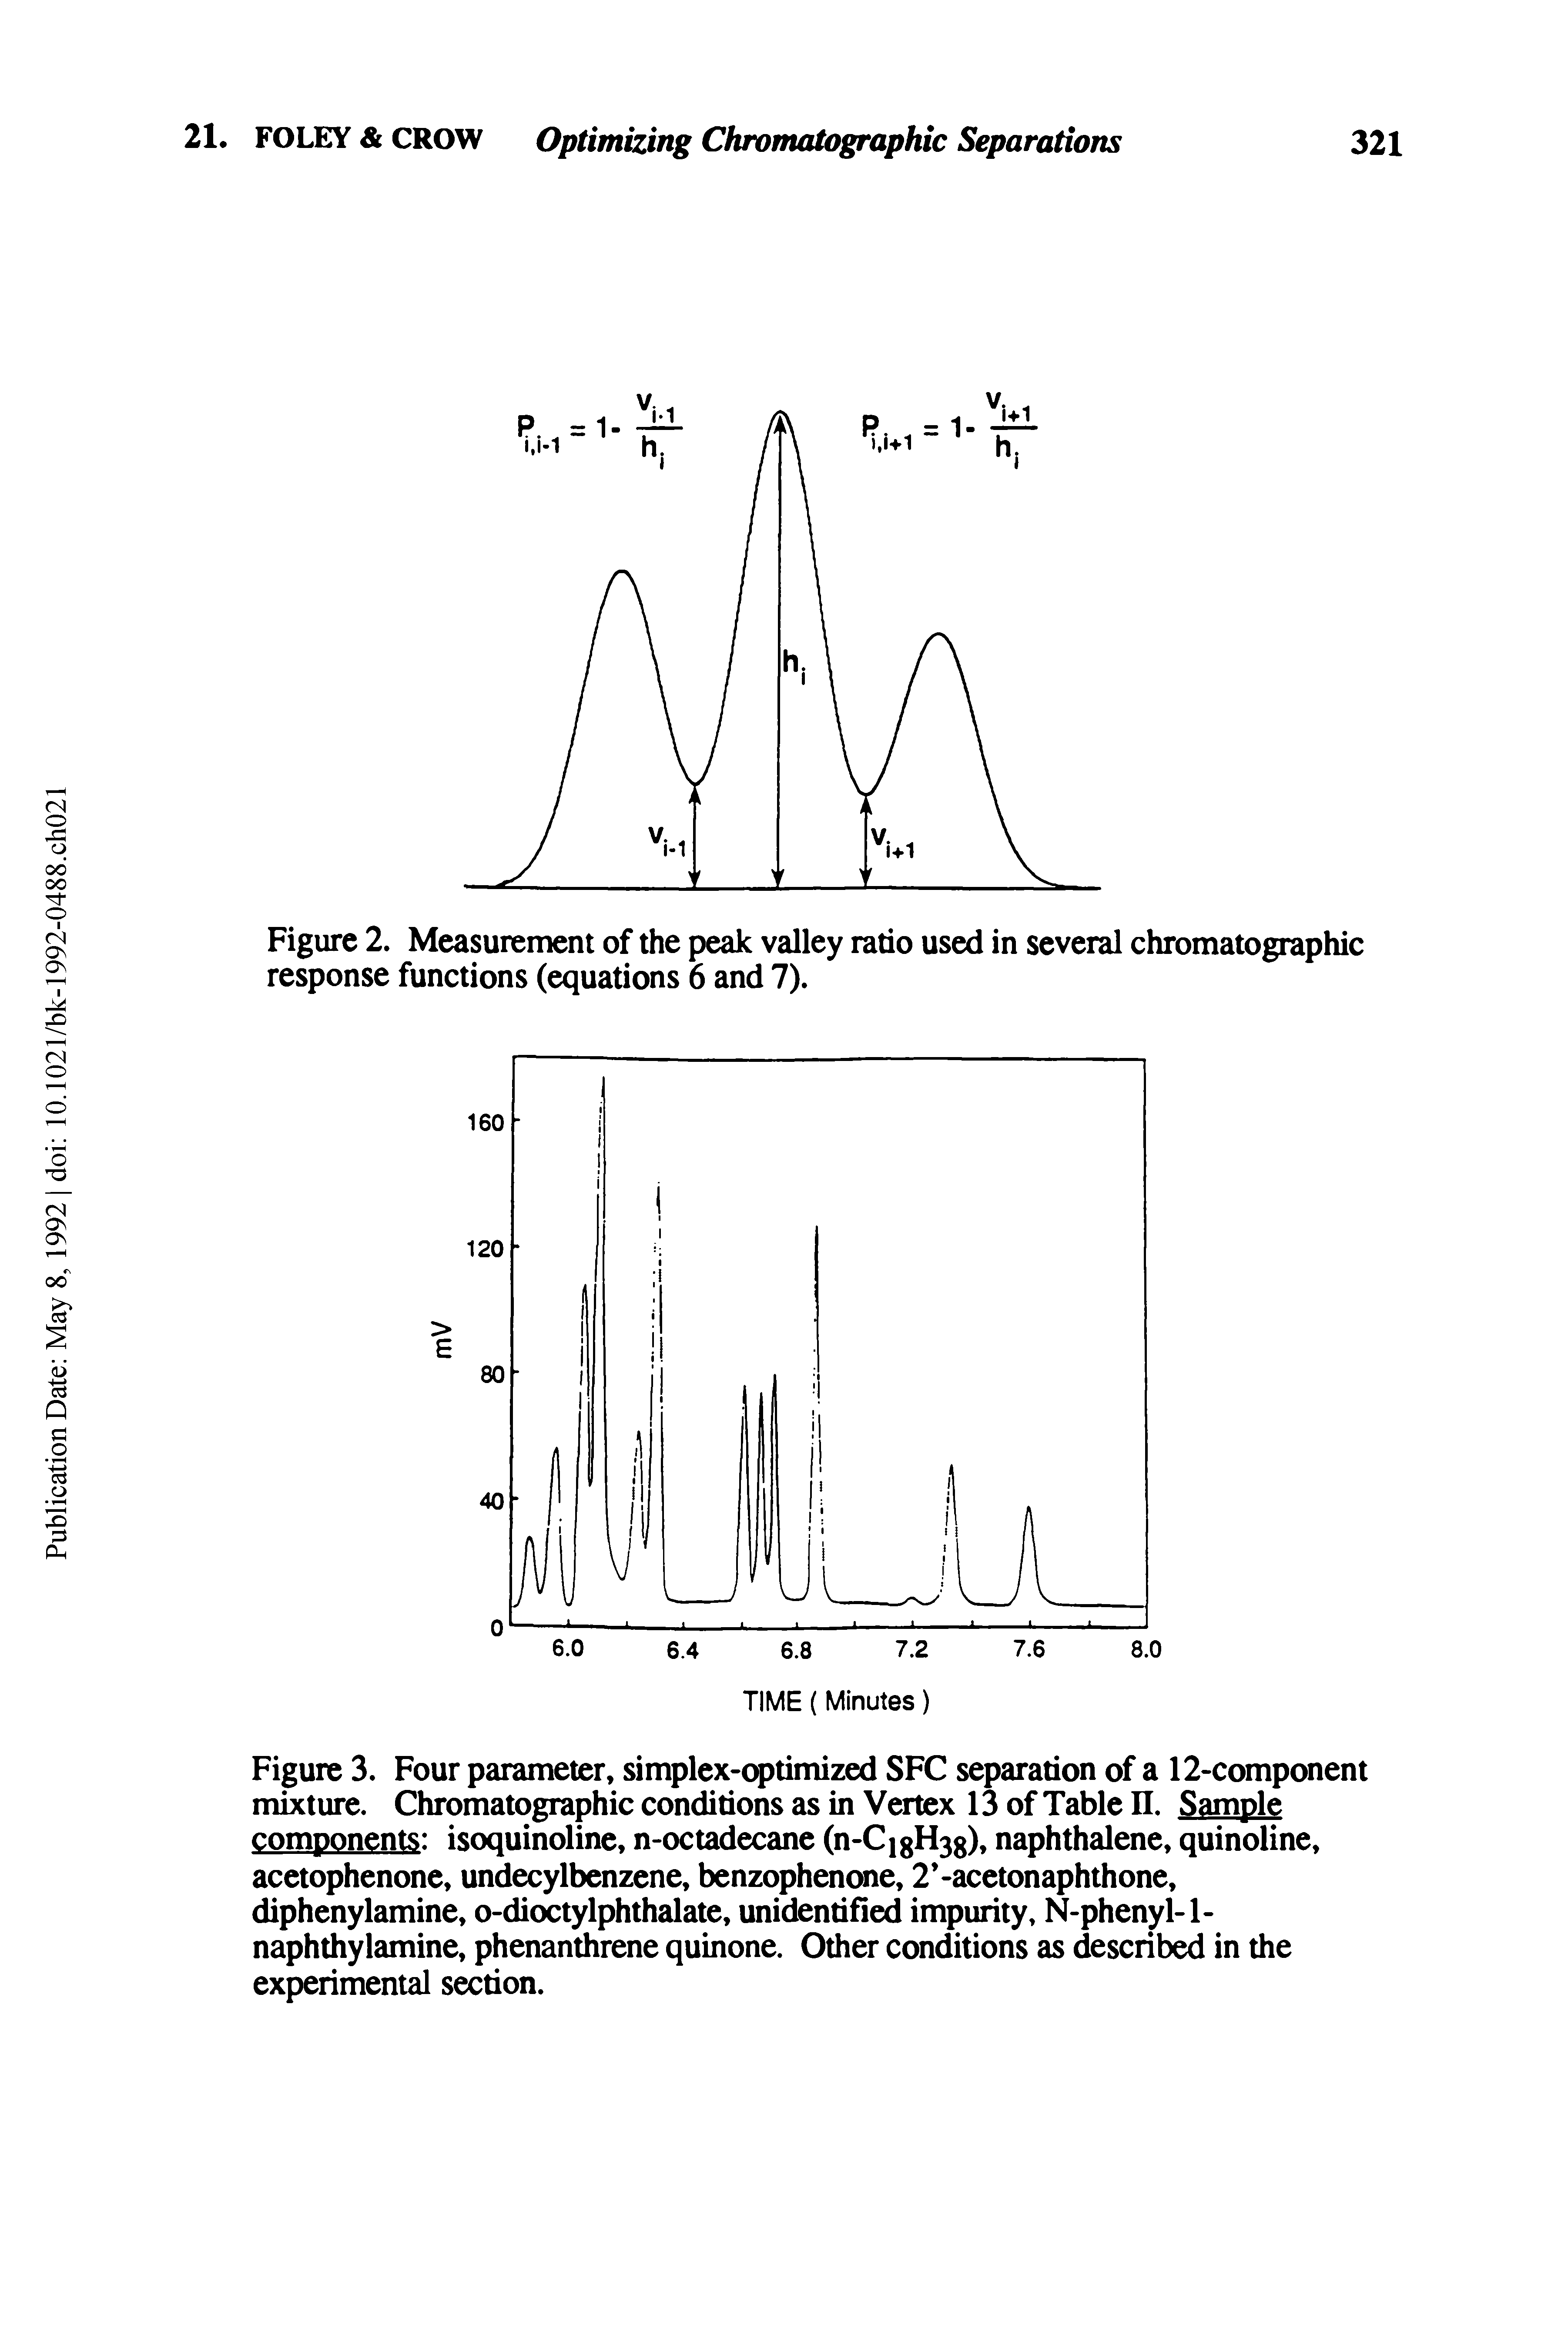 Figure 3. Four parameter, simplex-optimized SFC separation of a 12-component mixture. Chromatographic conditions as in Vertex 13 of Table II. Sample components isoquinoline, n-octadecane (n-CigH3g), naphthalene, quinoline, acetophenone, undecylbenzene, benzophenone, 2 -acetonaphthone, diphenylamine, o-dioctylphthalate, unidentified impurity, N-phenyl-1-naphthylamine, phenanthrene quinone. Other conditions as described in the experimental section.